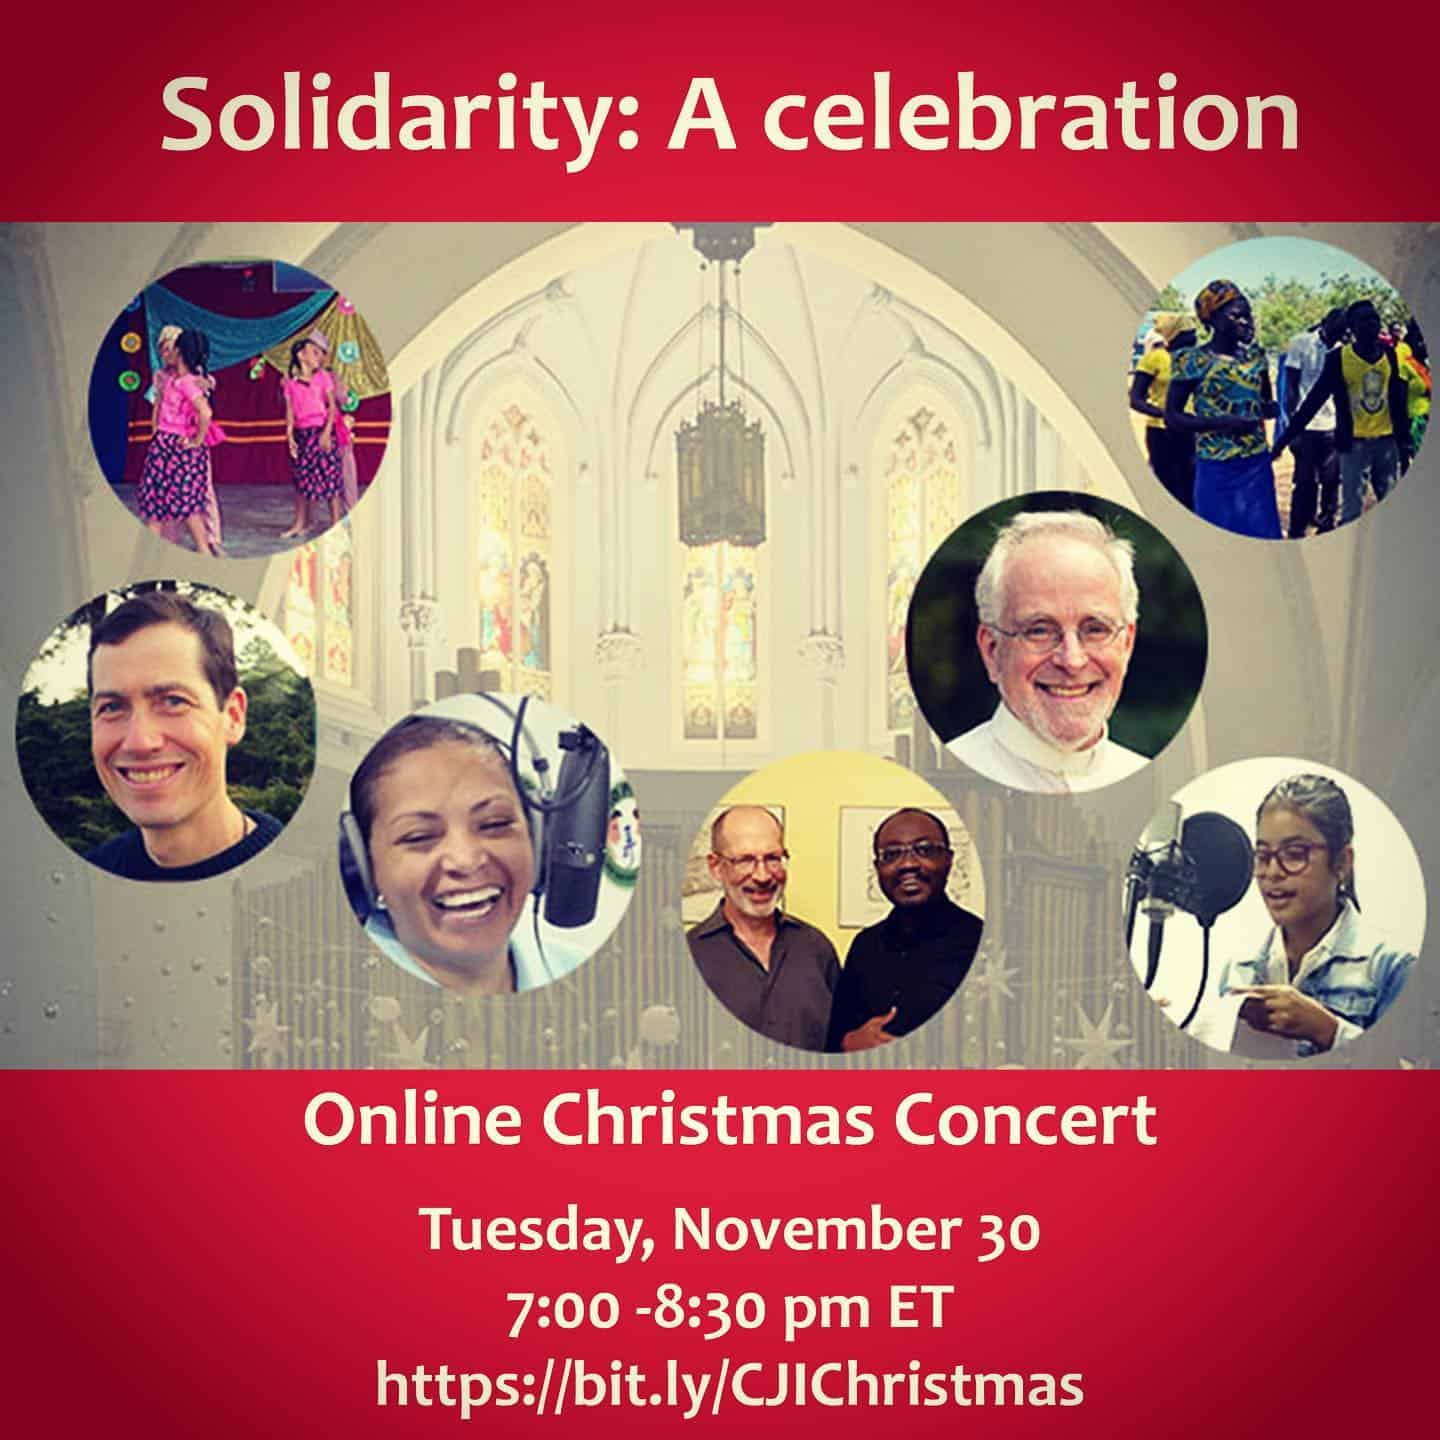 To register, please click on the link on our profile.  Join us for an online celebration through music, poetry and dance to prepare for Christmas and to thank all our friends and supporters who stood by CJI and our Jesuit partners in Africa, Asia and Latin America through the difficult times this year.  Hosted by @jennycafiso and Luis Fernando Gómez @rjm.hospitalidad  Performers include:
– Youth Recreation Group, Doro Refugee Camp (South Sudan)
– Moran Memorial School (Nepal)
– Jóvenes Generarte (Colombia)
– Radio Progreso @radioprogresohn (Honduras)
– Erik Oland SJ (Canada)
– Peter Bisson SJ and William Tcheumtchoua Nzali SJ (Canada)
– Greg Kennedy SJ (Canada)
And many other international performers  #christmasconcert #givingtuesday #jesuits @jesuitsofcanada